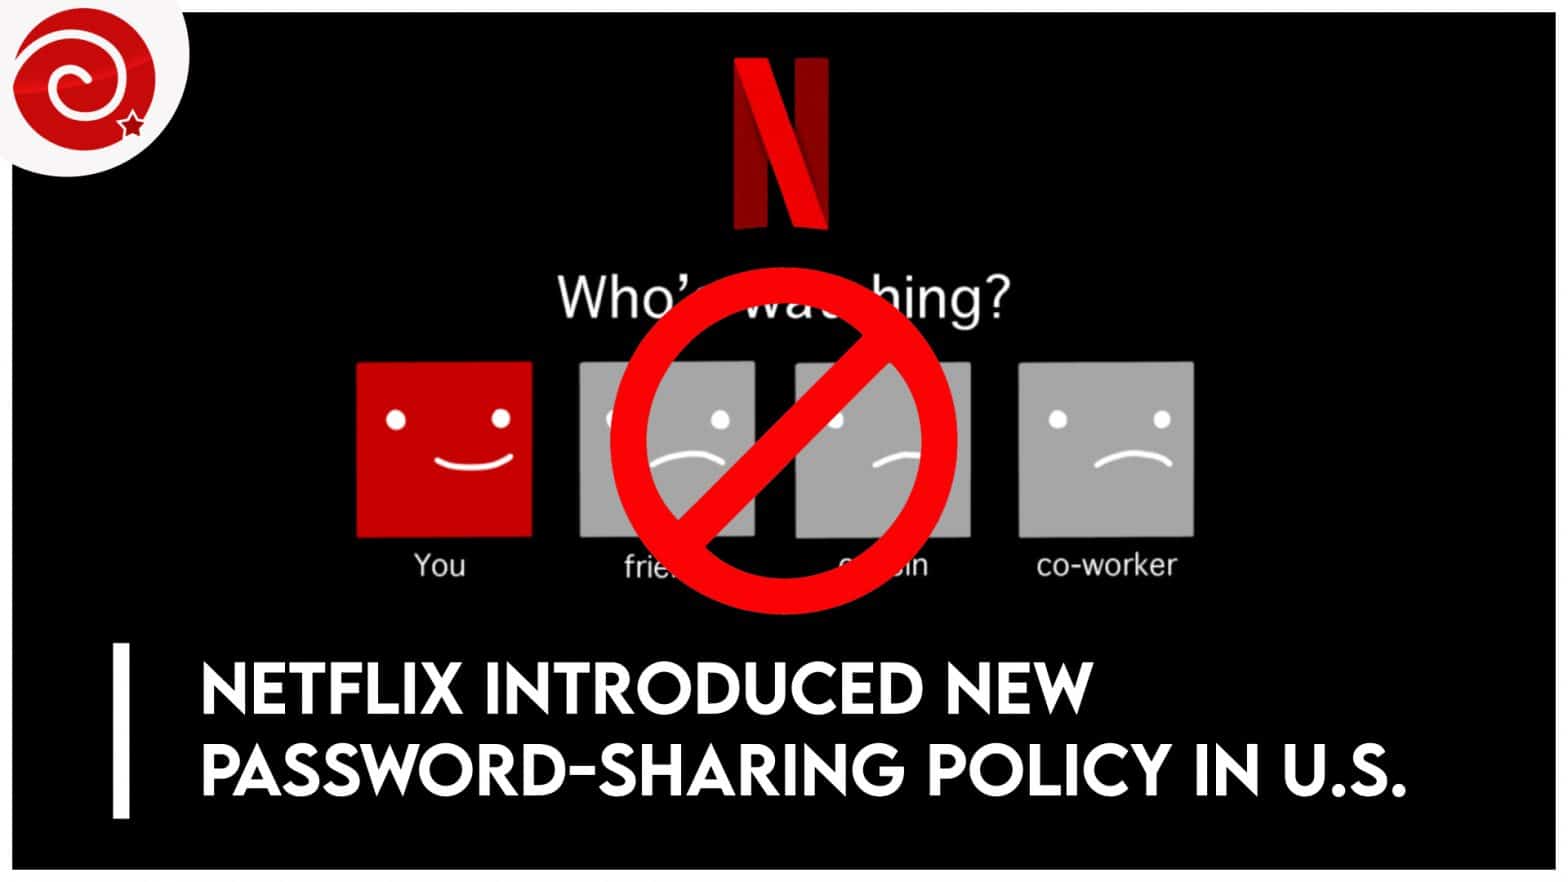 Netflix introduced a new password-sharing policy in the U.S.